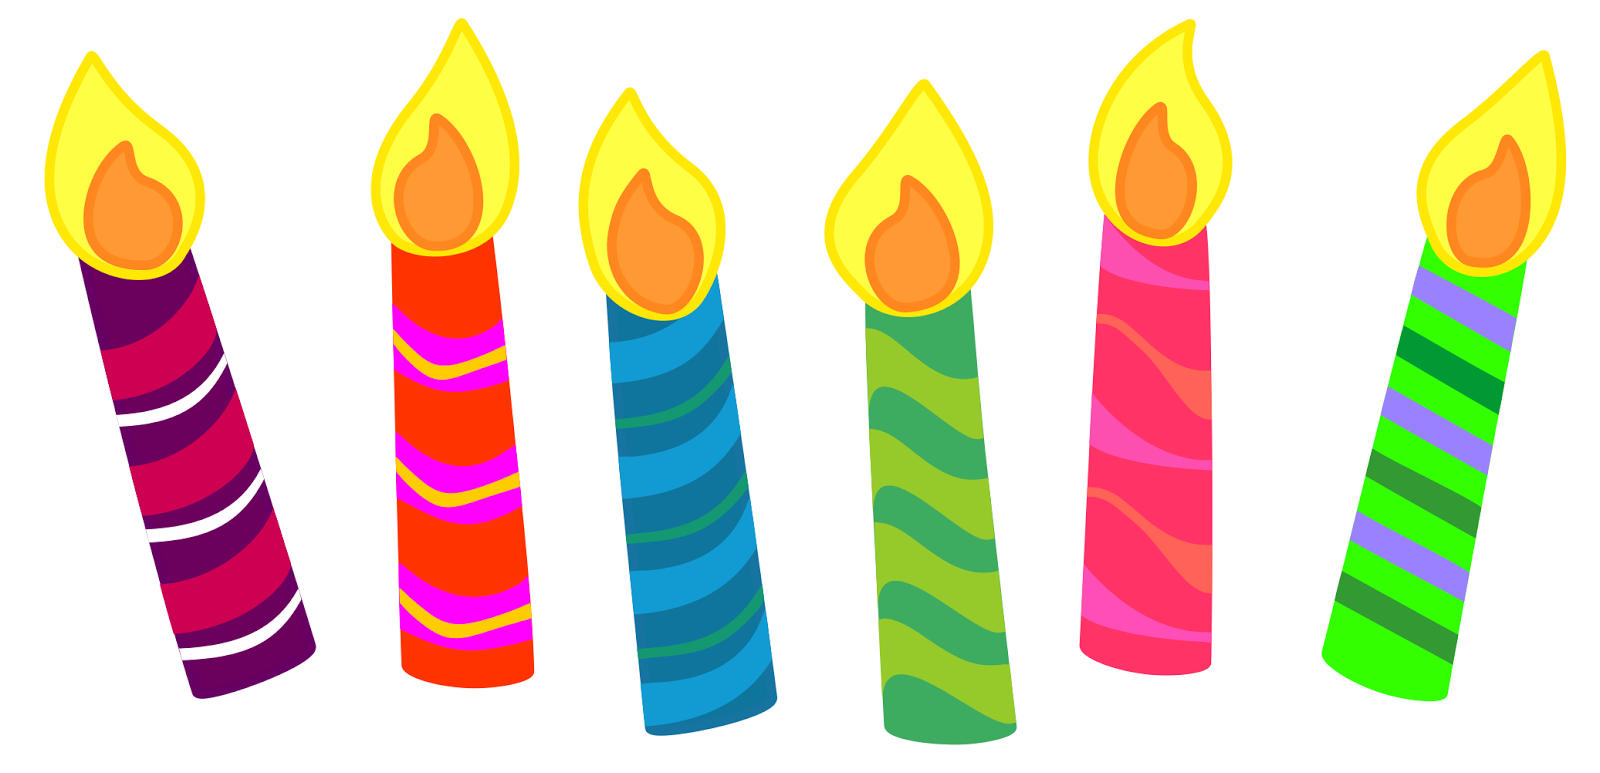 Birthday candle clipart 5 candles clip art